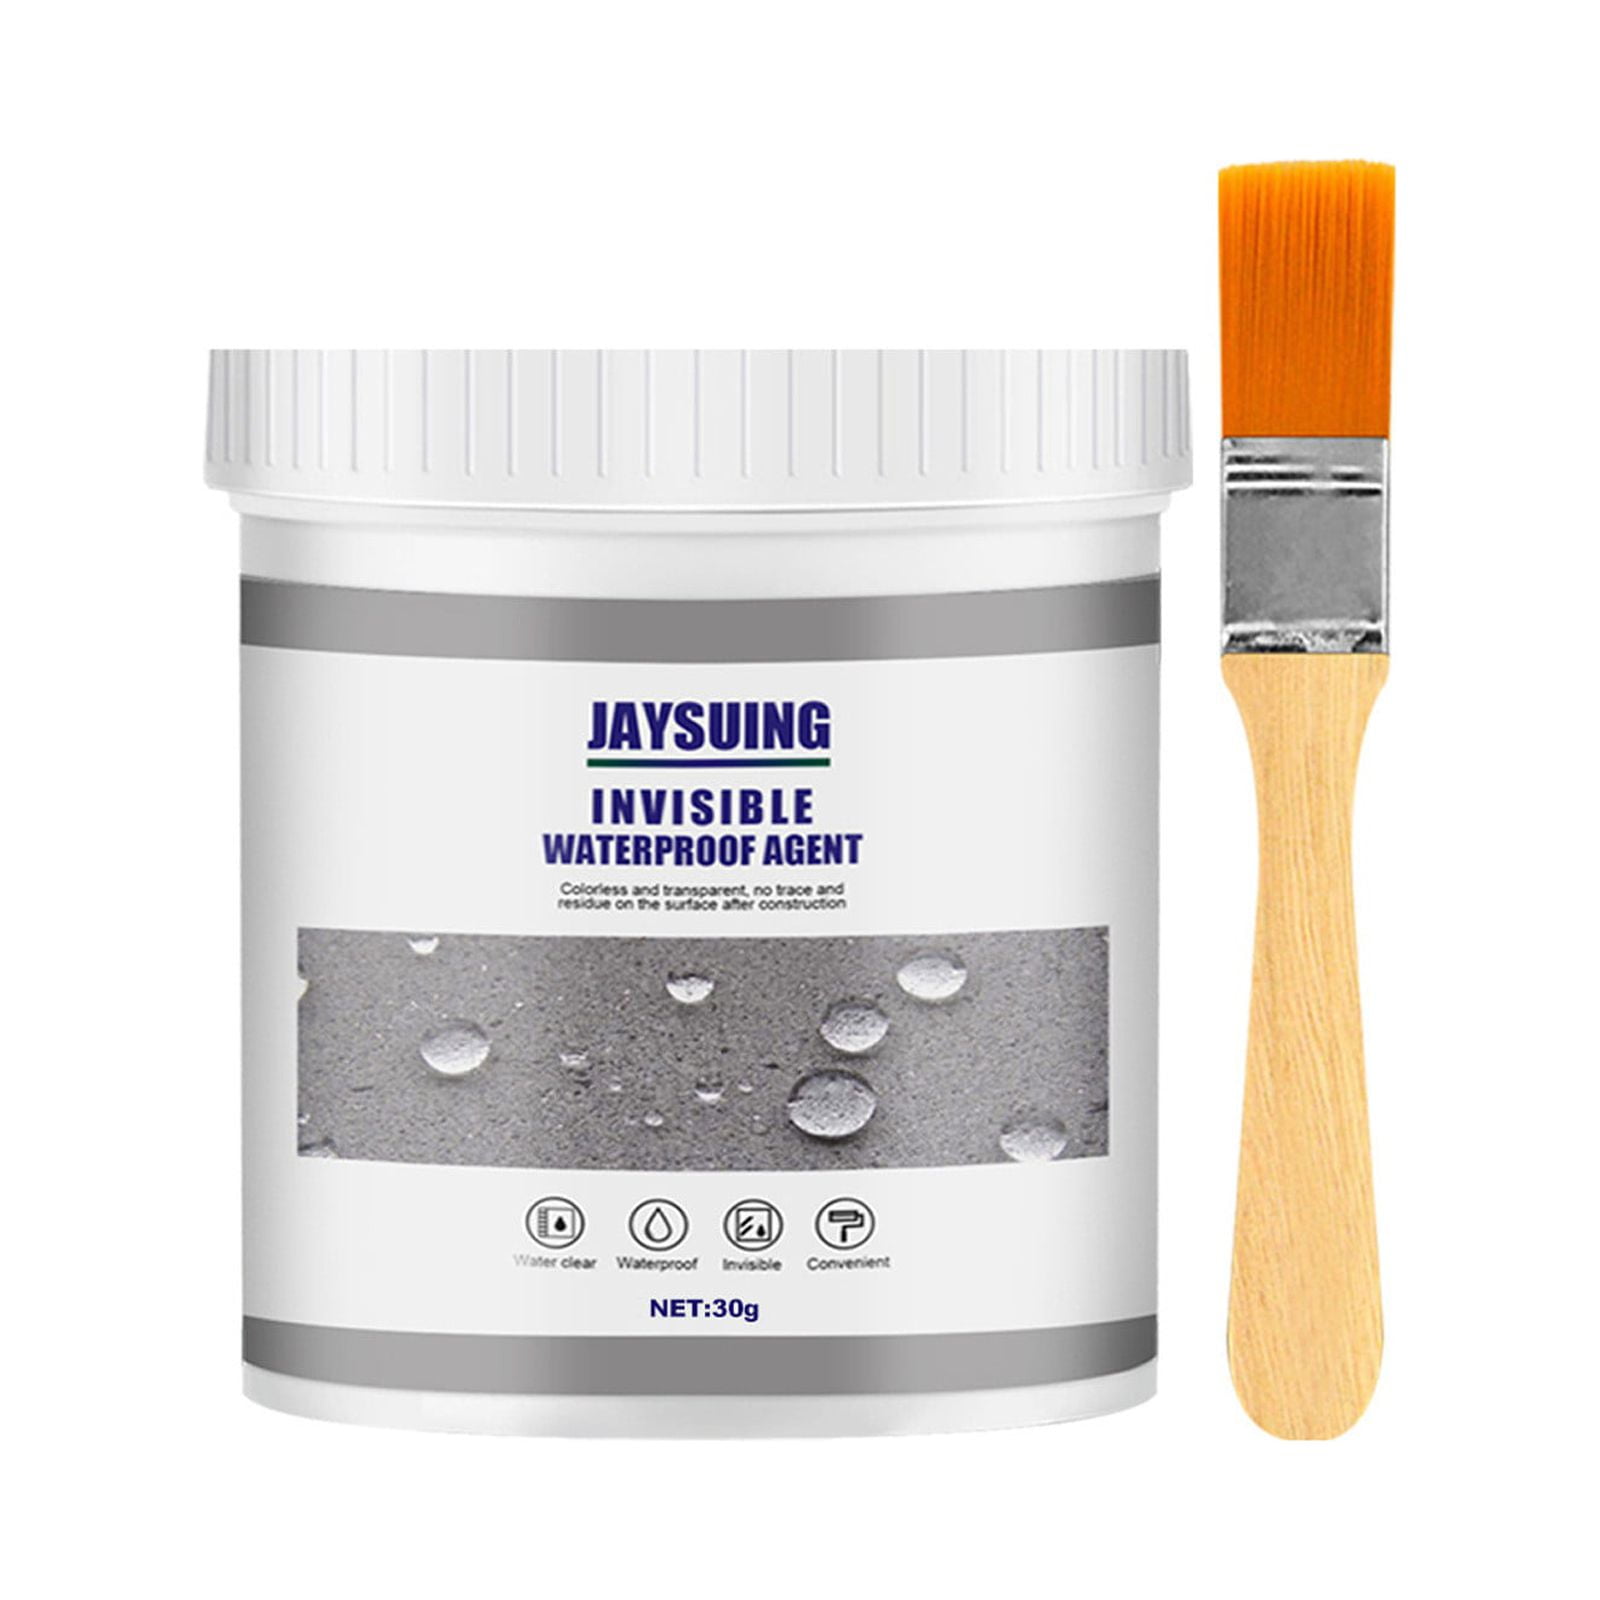 Jaysuing Invisible Waterproof Agent 1.1Fl Oz (30ml), Transparent Waterproof  Coating Waterproof Glue - Waterproof Sealant, Super Strong Invisible